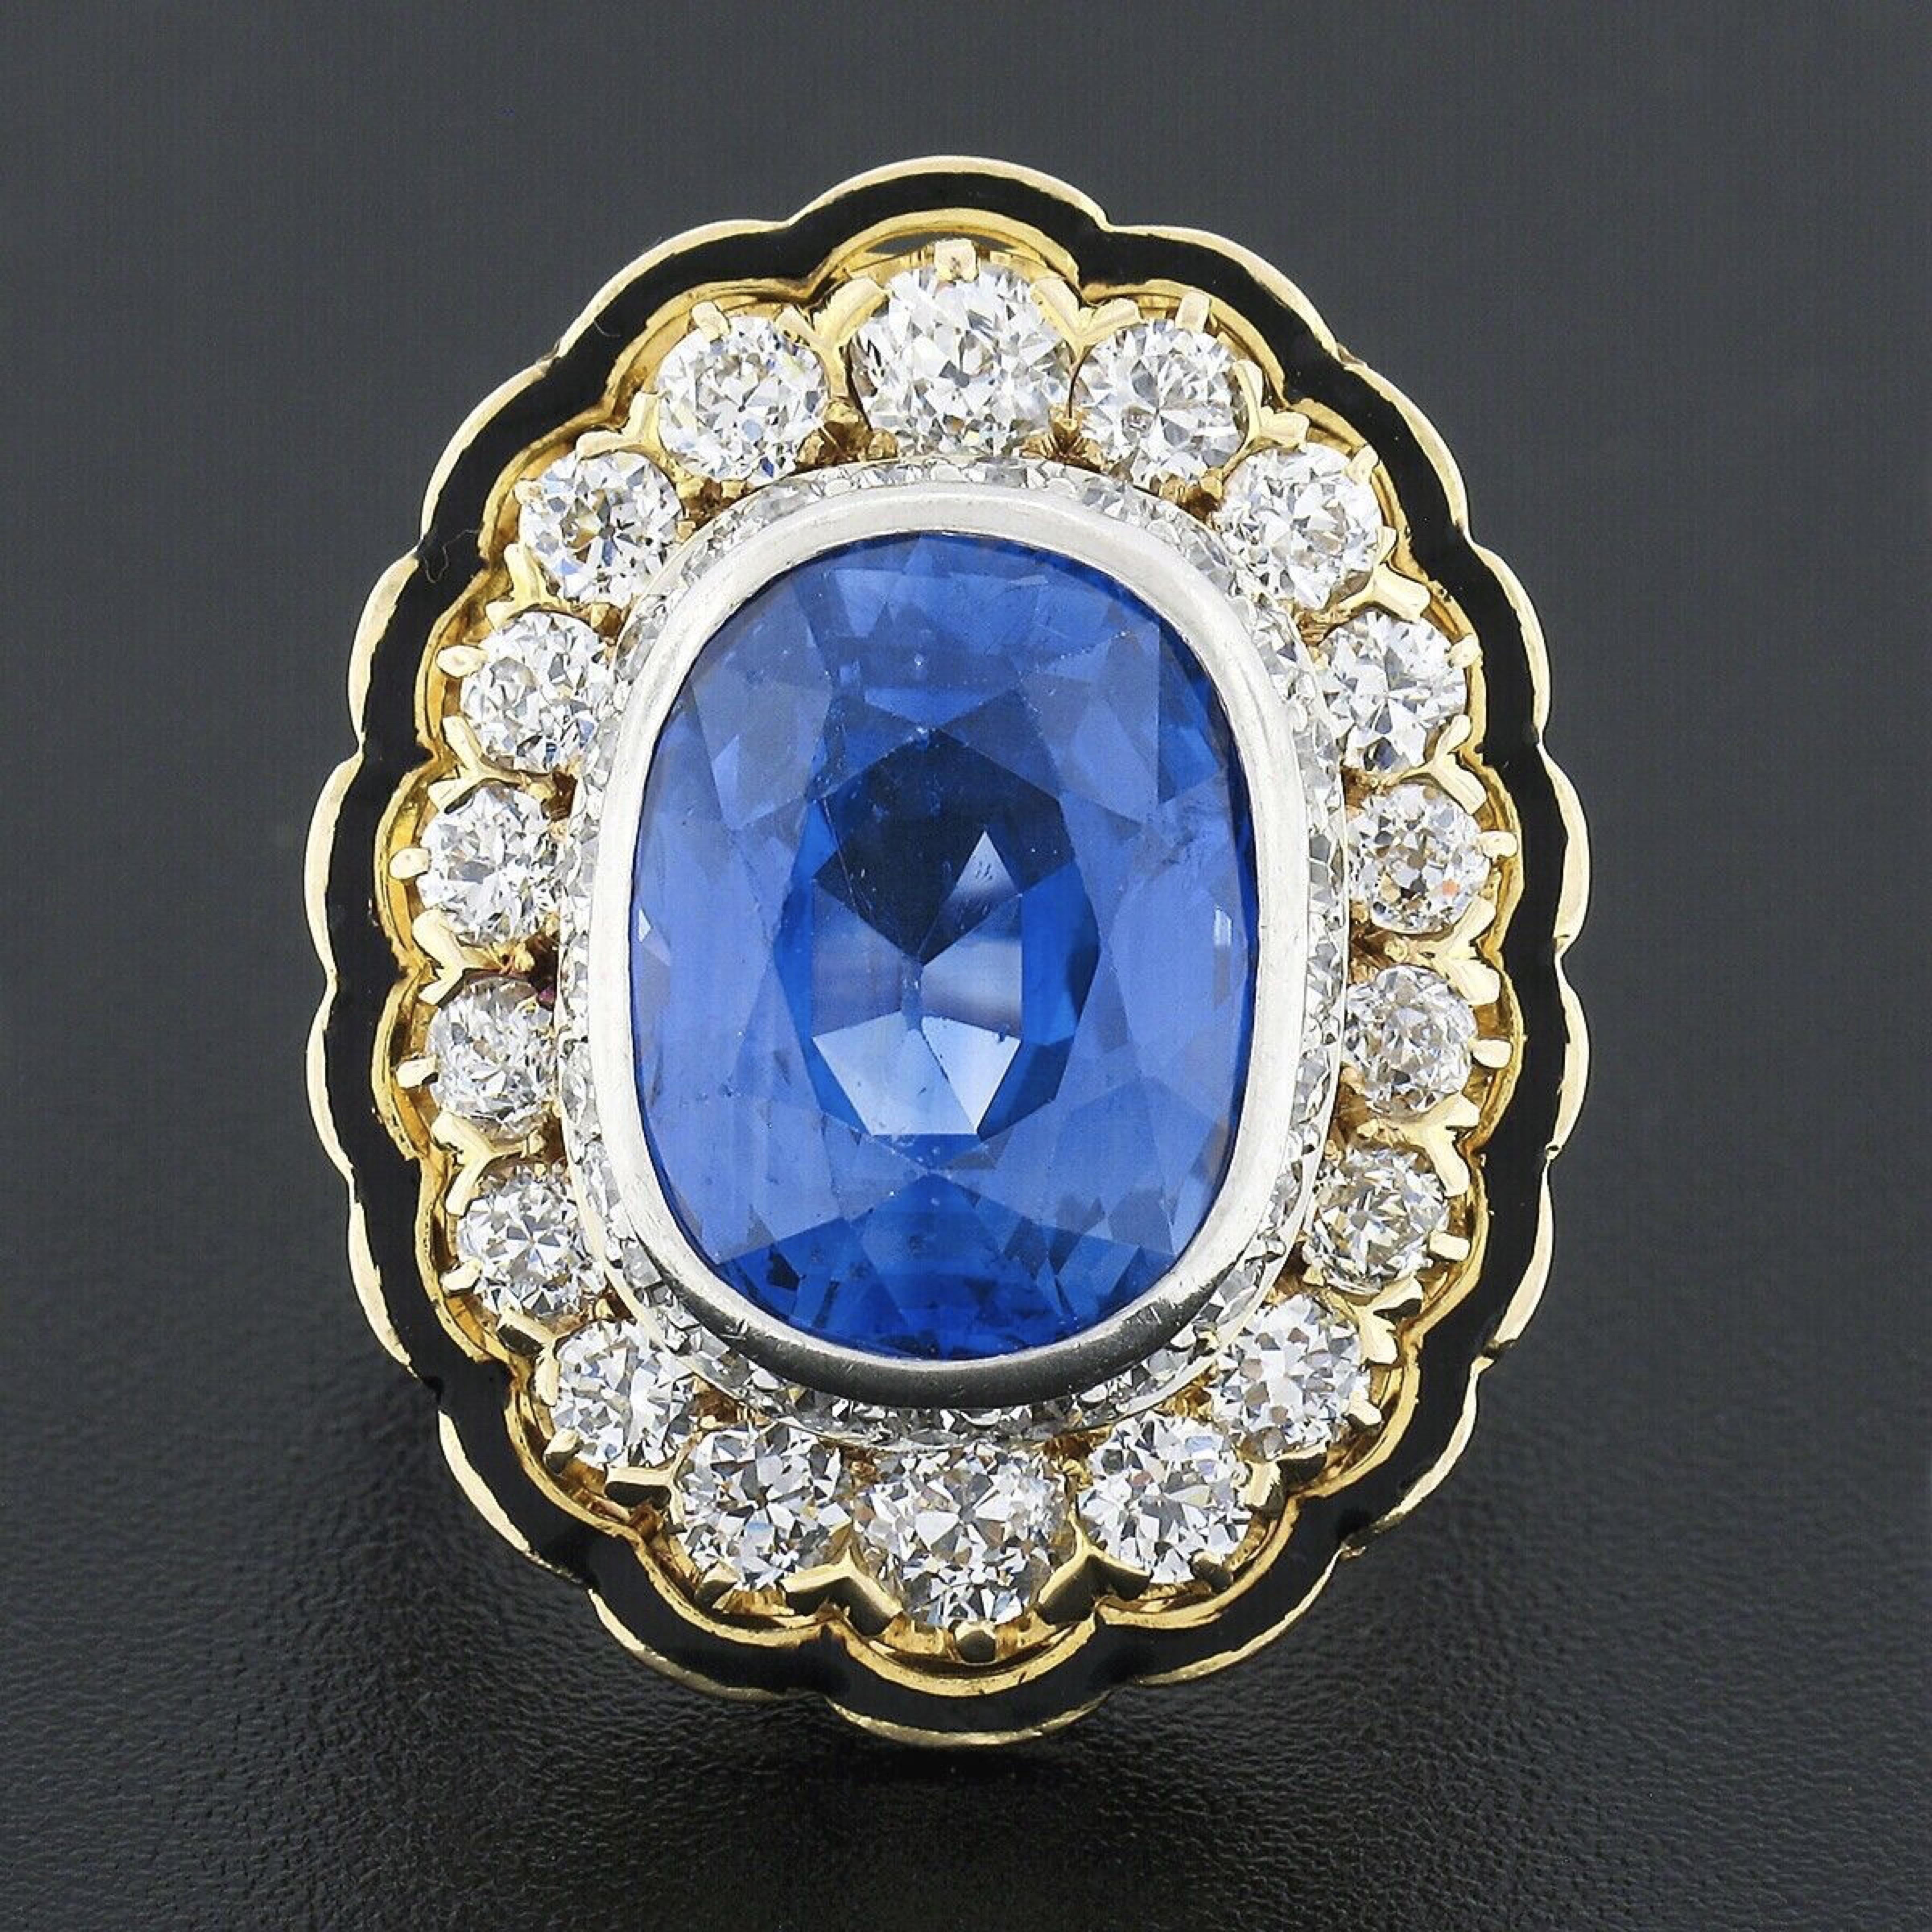 This truly magnificent and stunning vintage cocktail ring is crafted in solid 14k yellow gold and features a breathtaking, AGL certified, natural sapphire stone neatly bezel set in platinum at the center of a true Victorian revival design. This very